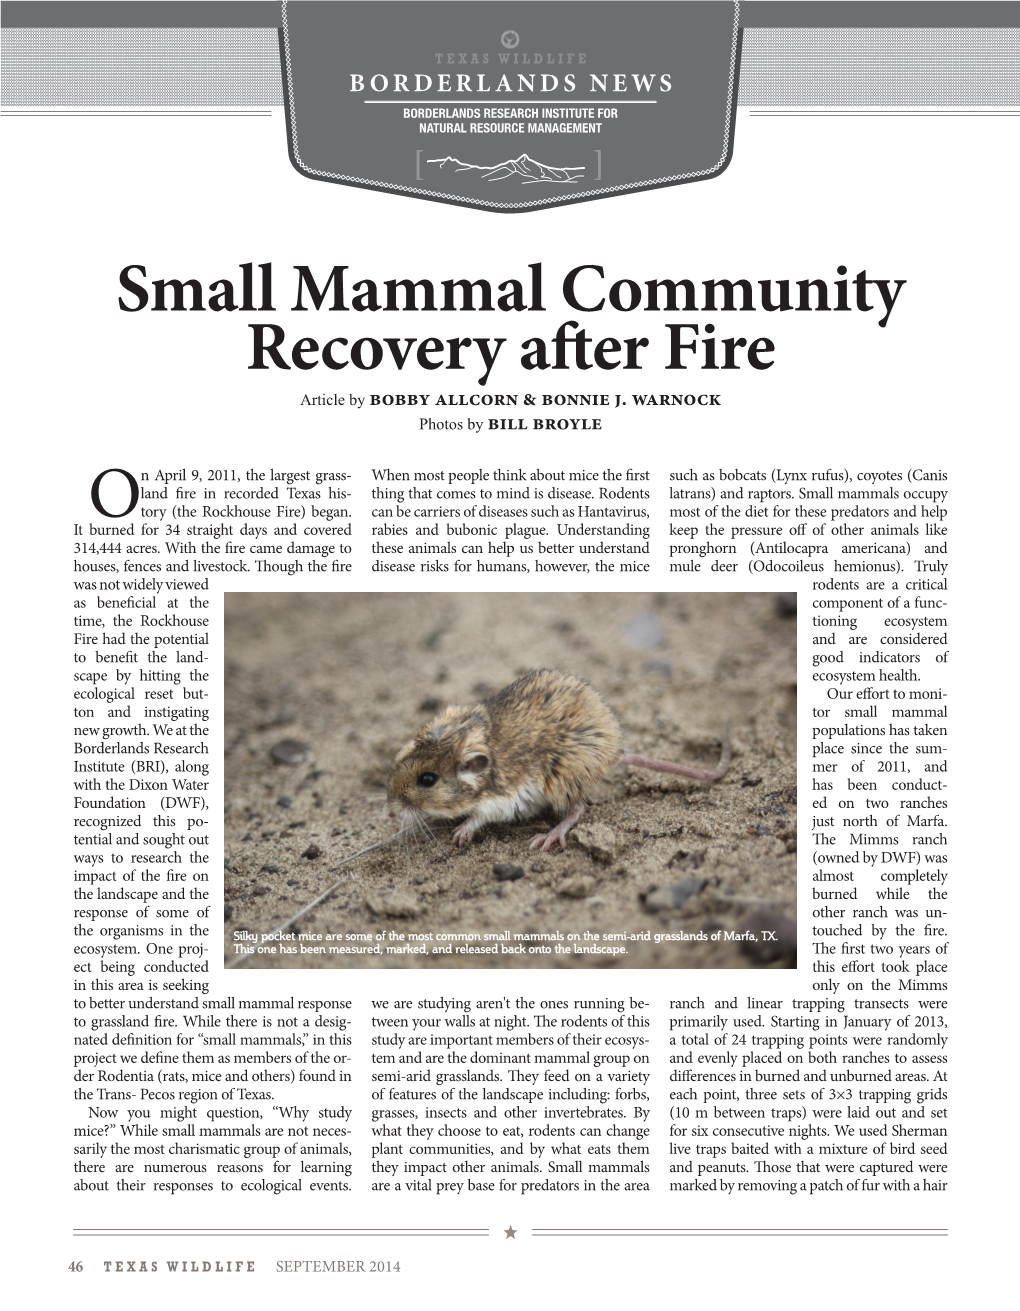 Small Mammal Community Recovery After Fire Article by Bobby Allcorn & Bonnie J